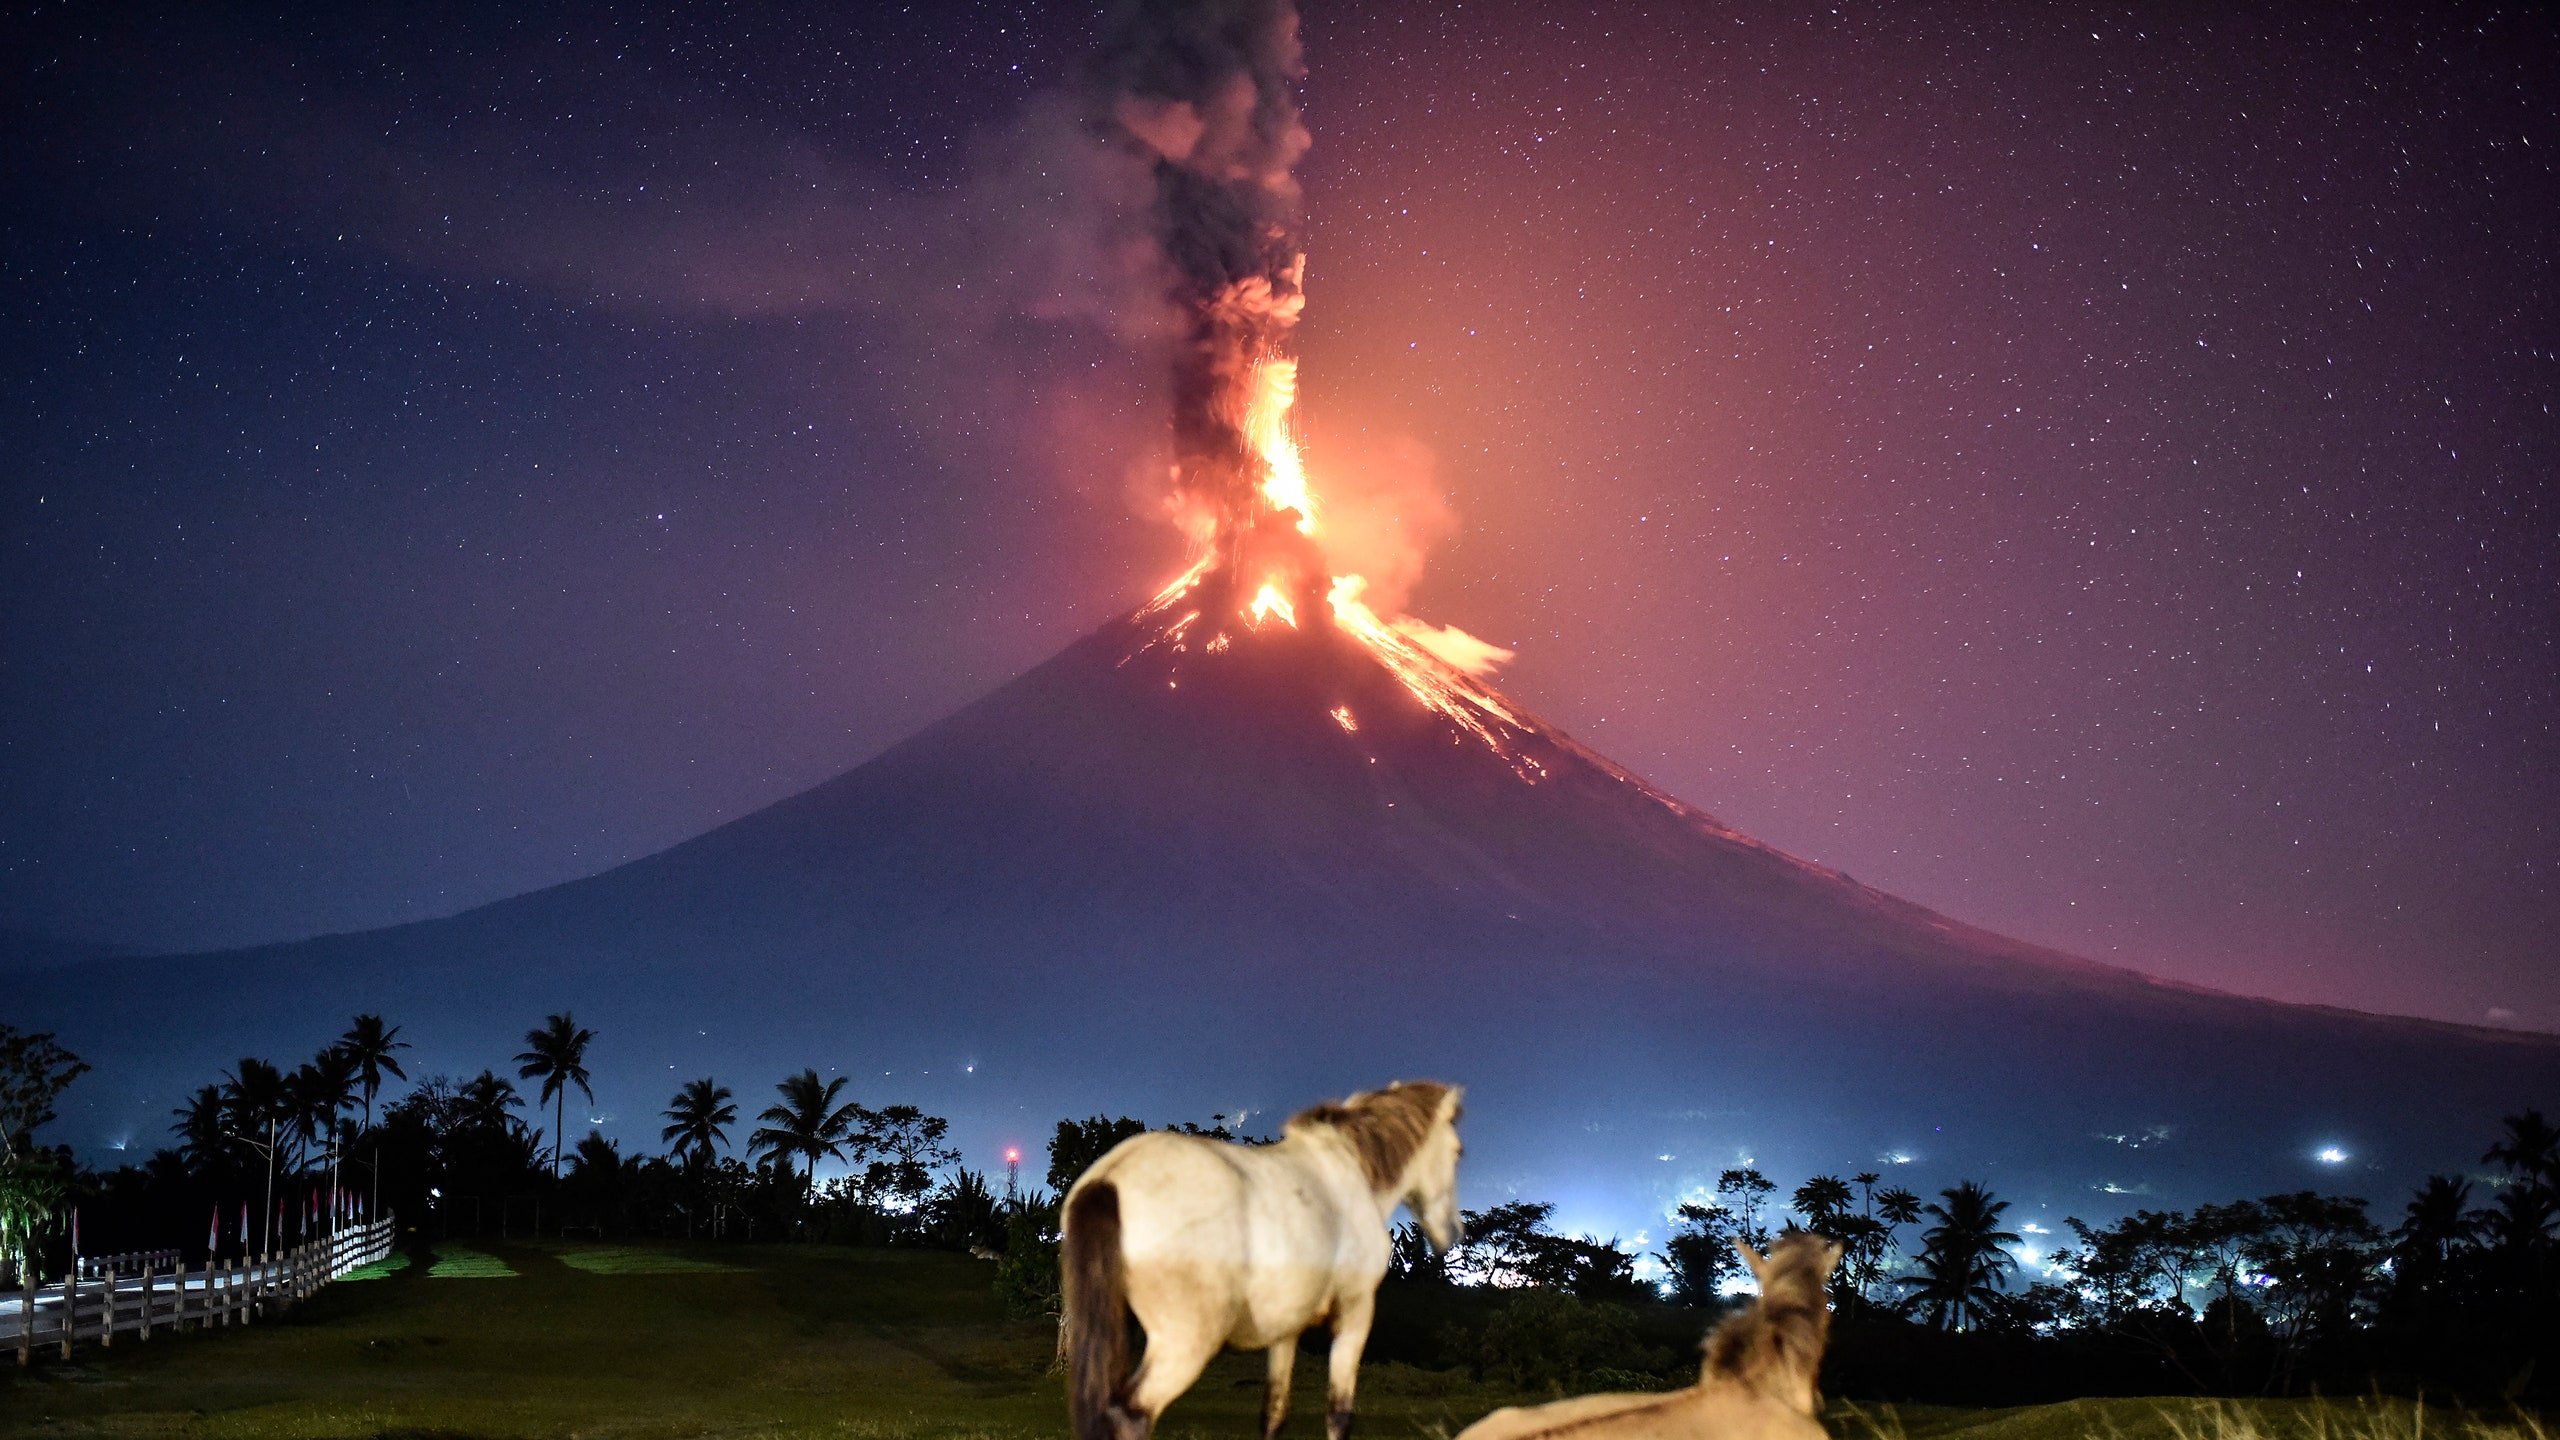 This photo captures the eerie, otherworldly fury of Mount Mayon